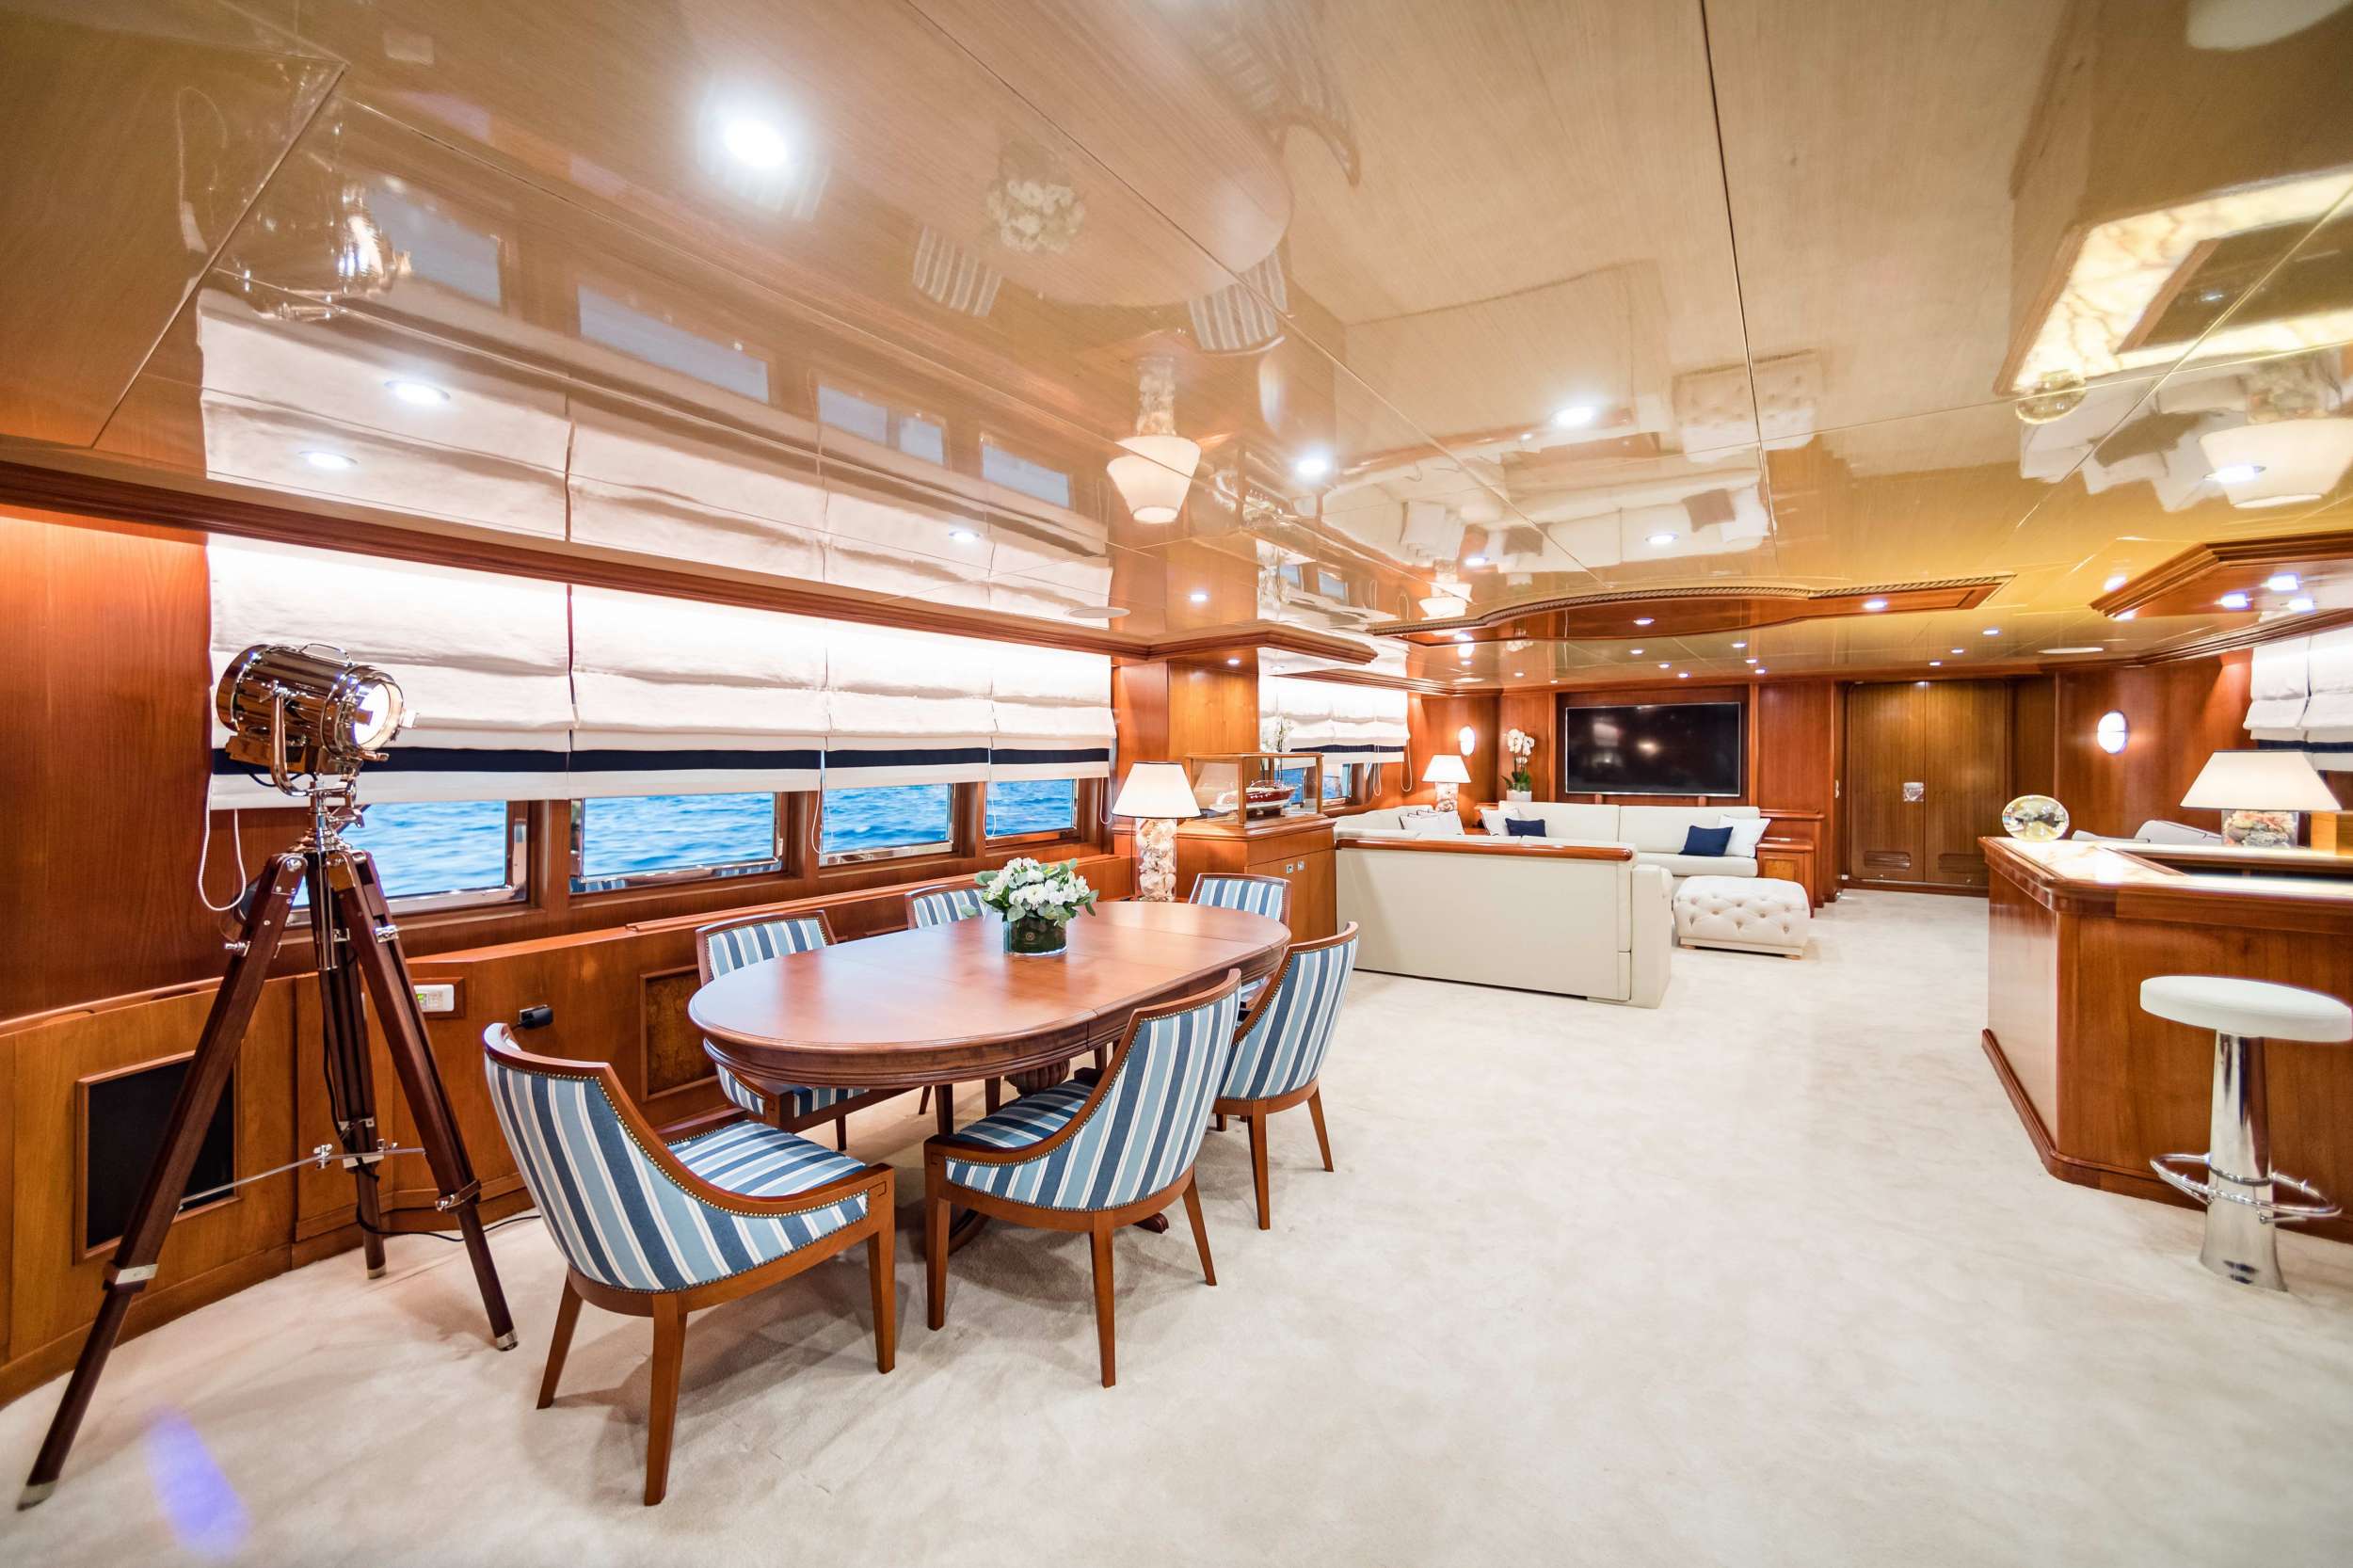 WIND OF FORTUNE Yacht Charter - Salon